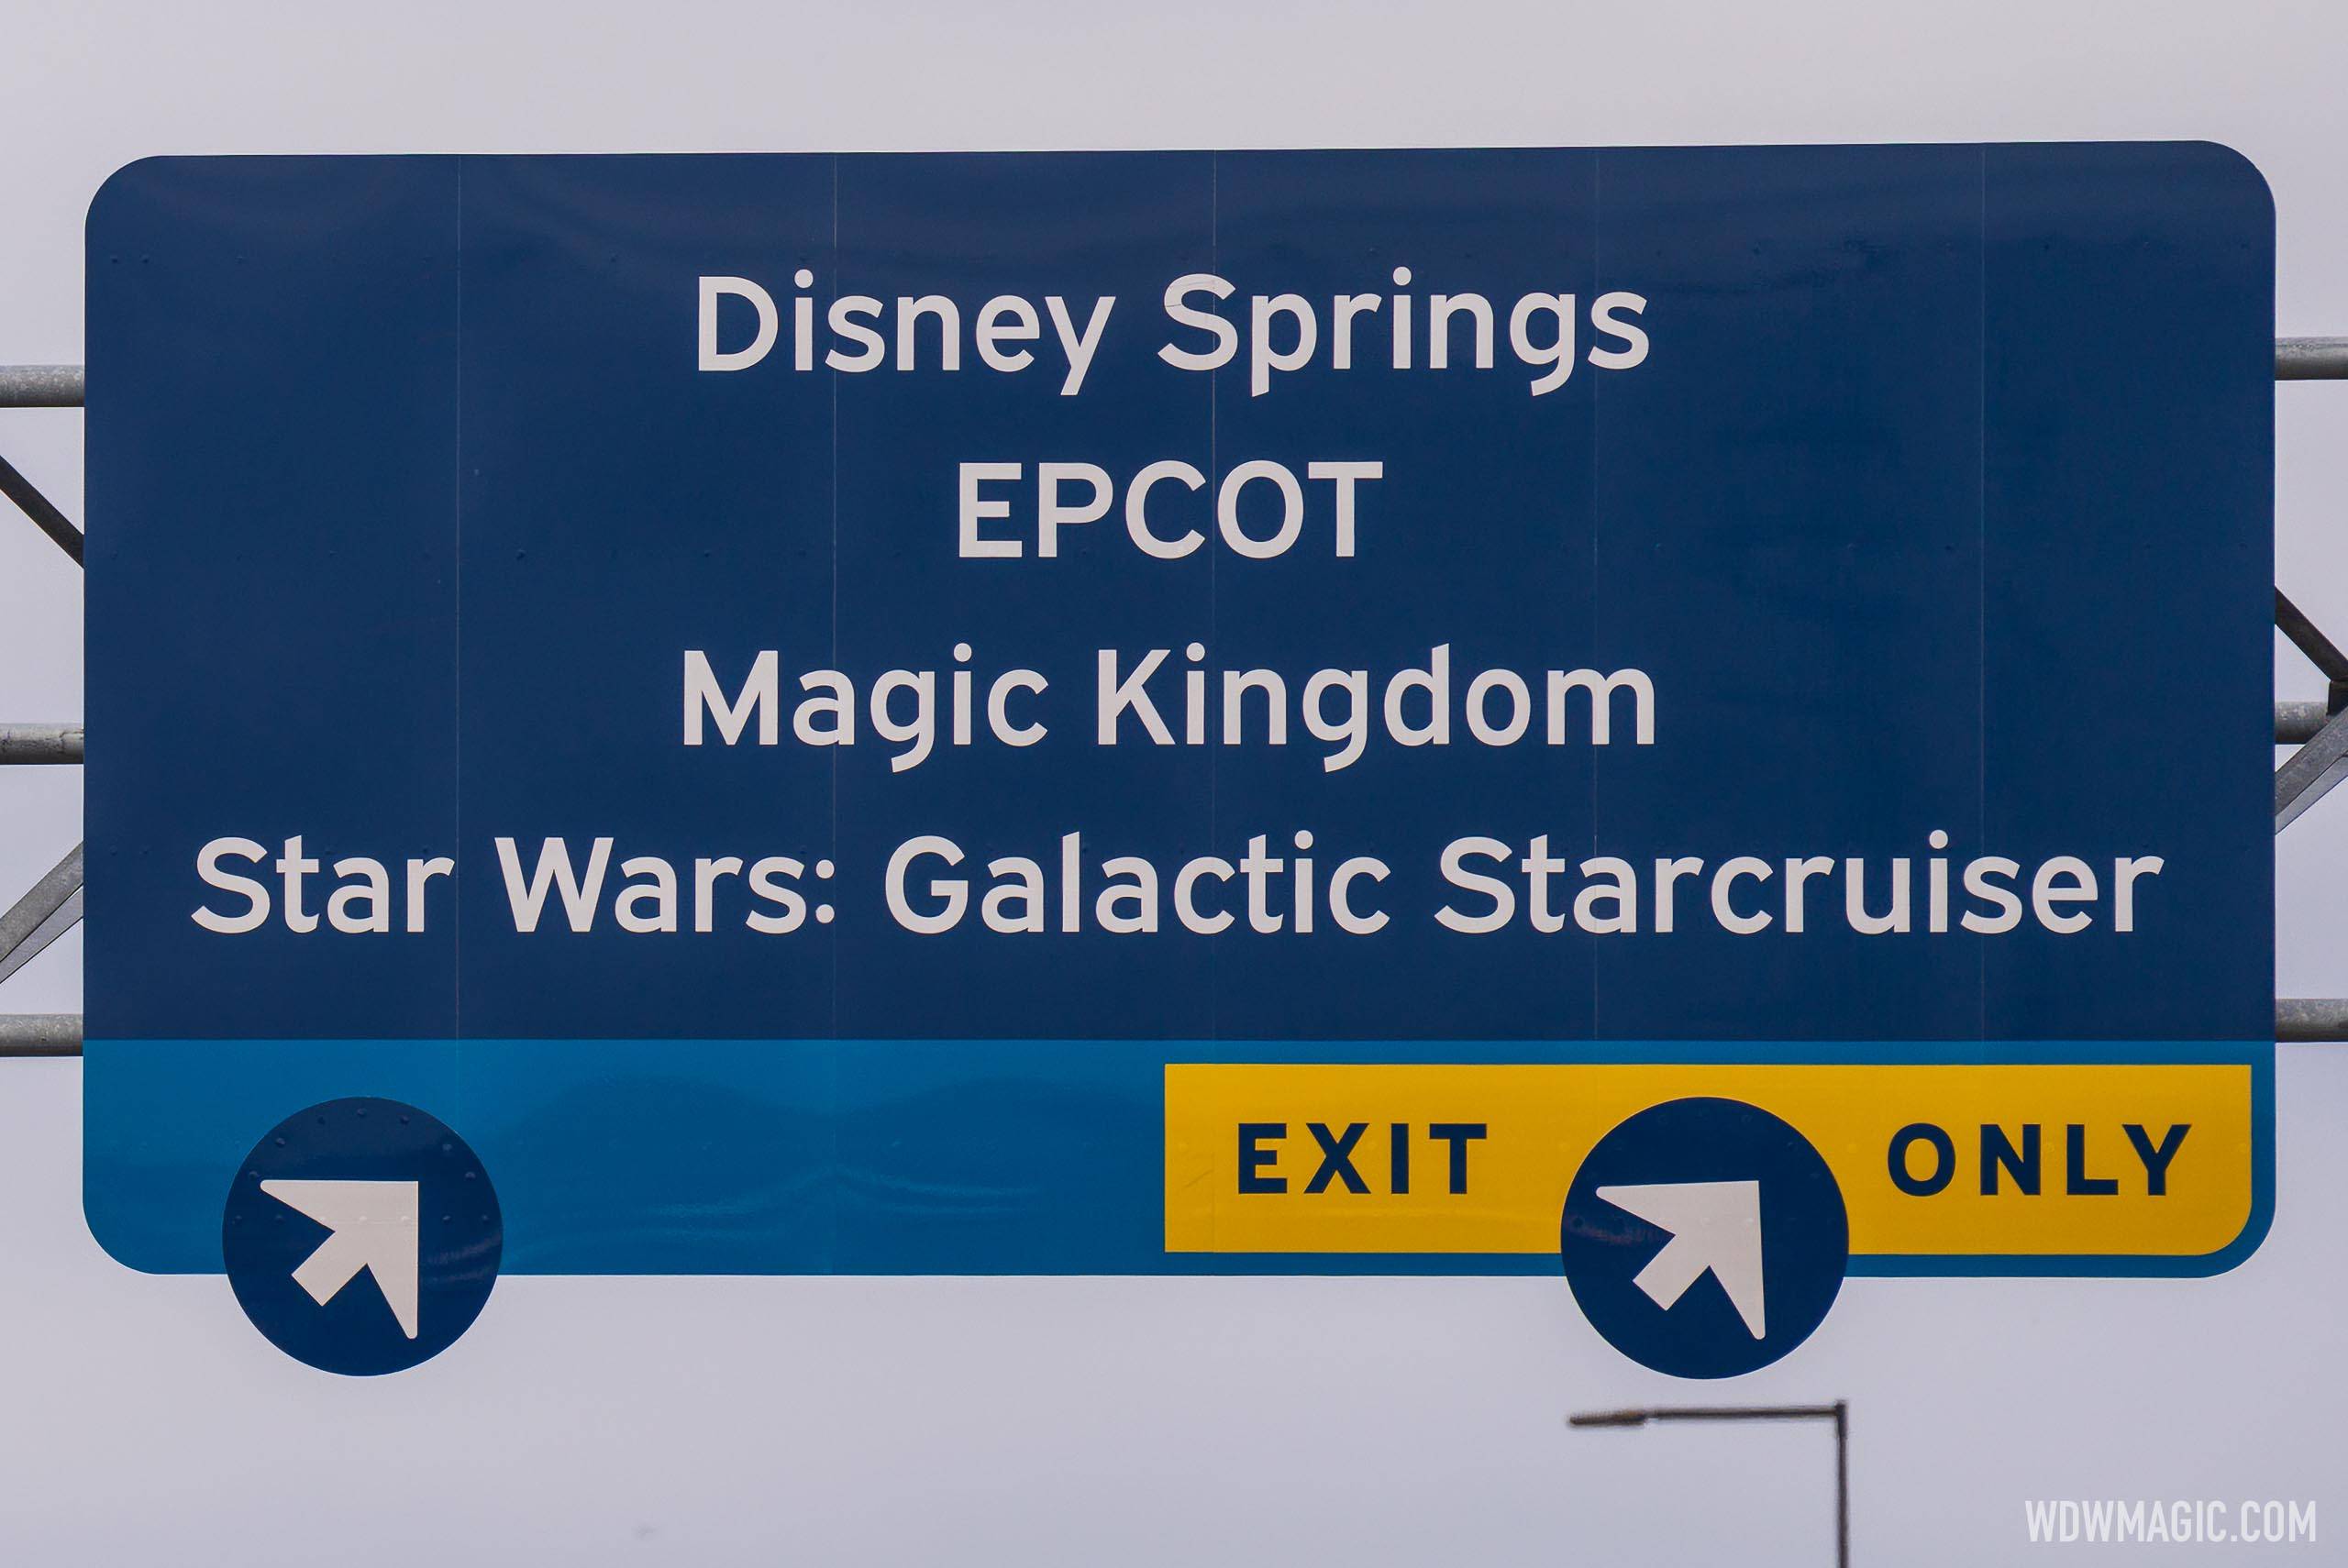 The new sign includes directions to the new Star Wars Galactic Starcruiser